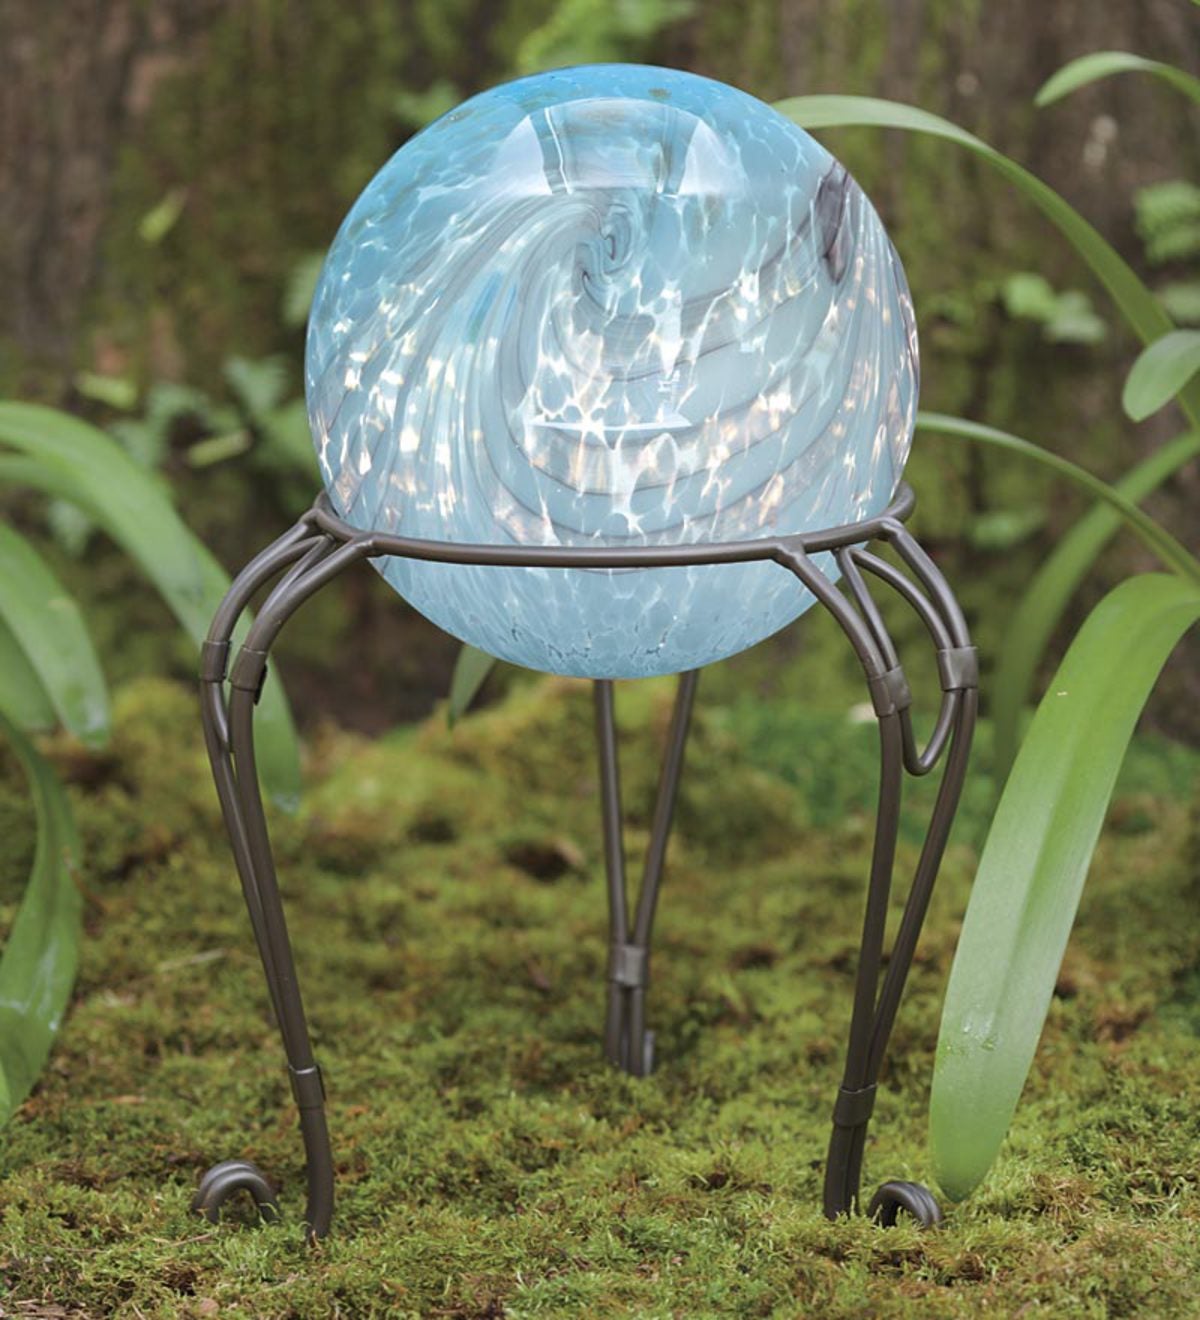 Pearly Glass Gazing Ball With Metal Stand - Blue